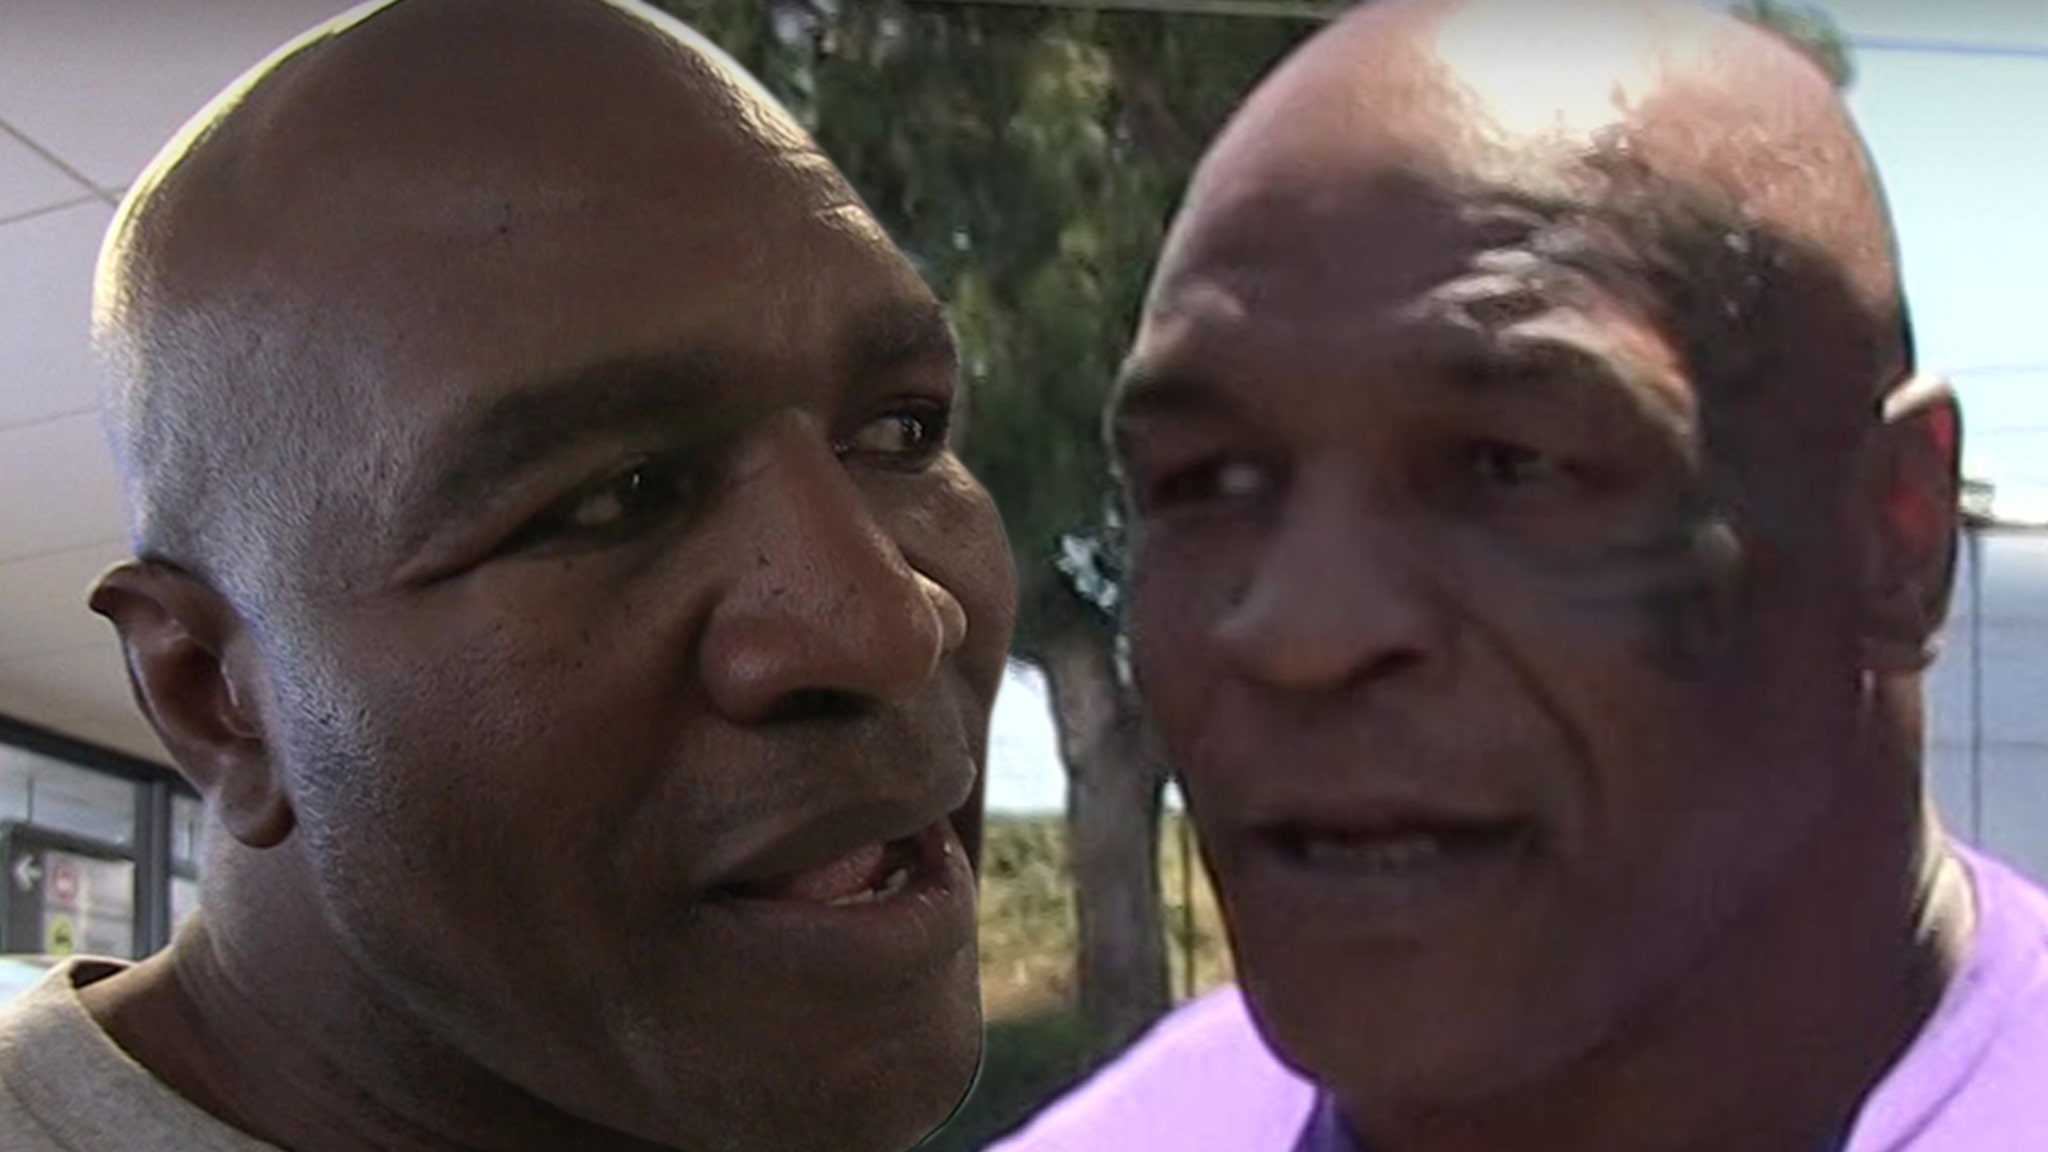 Evander Holyfield’s camp claims Mike Tyson fight does not happen, ‘Deal Fell Apart’